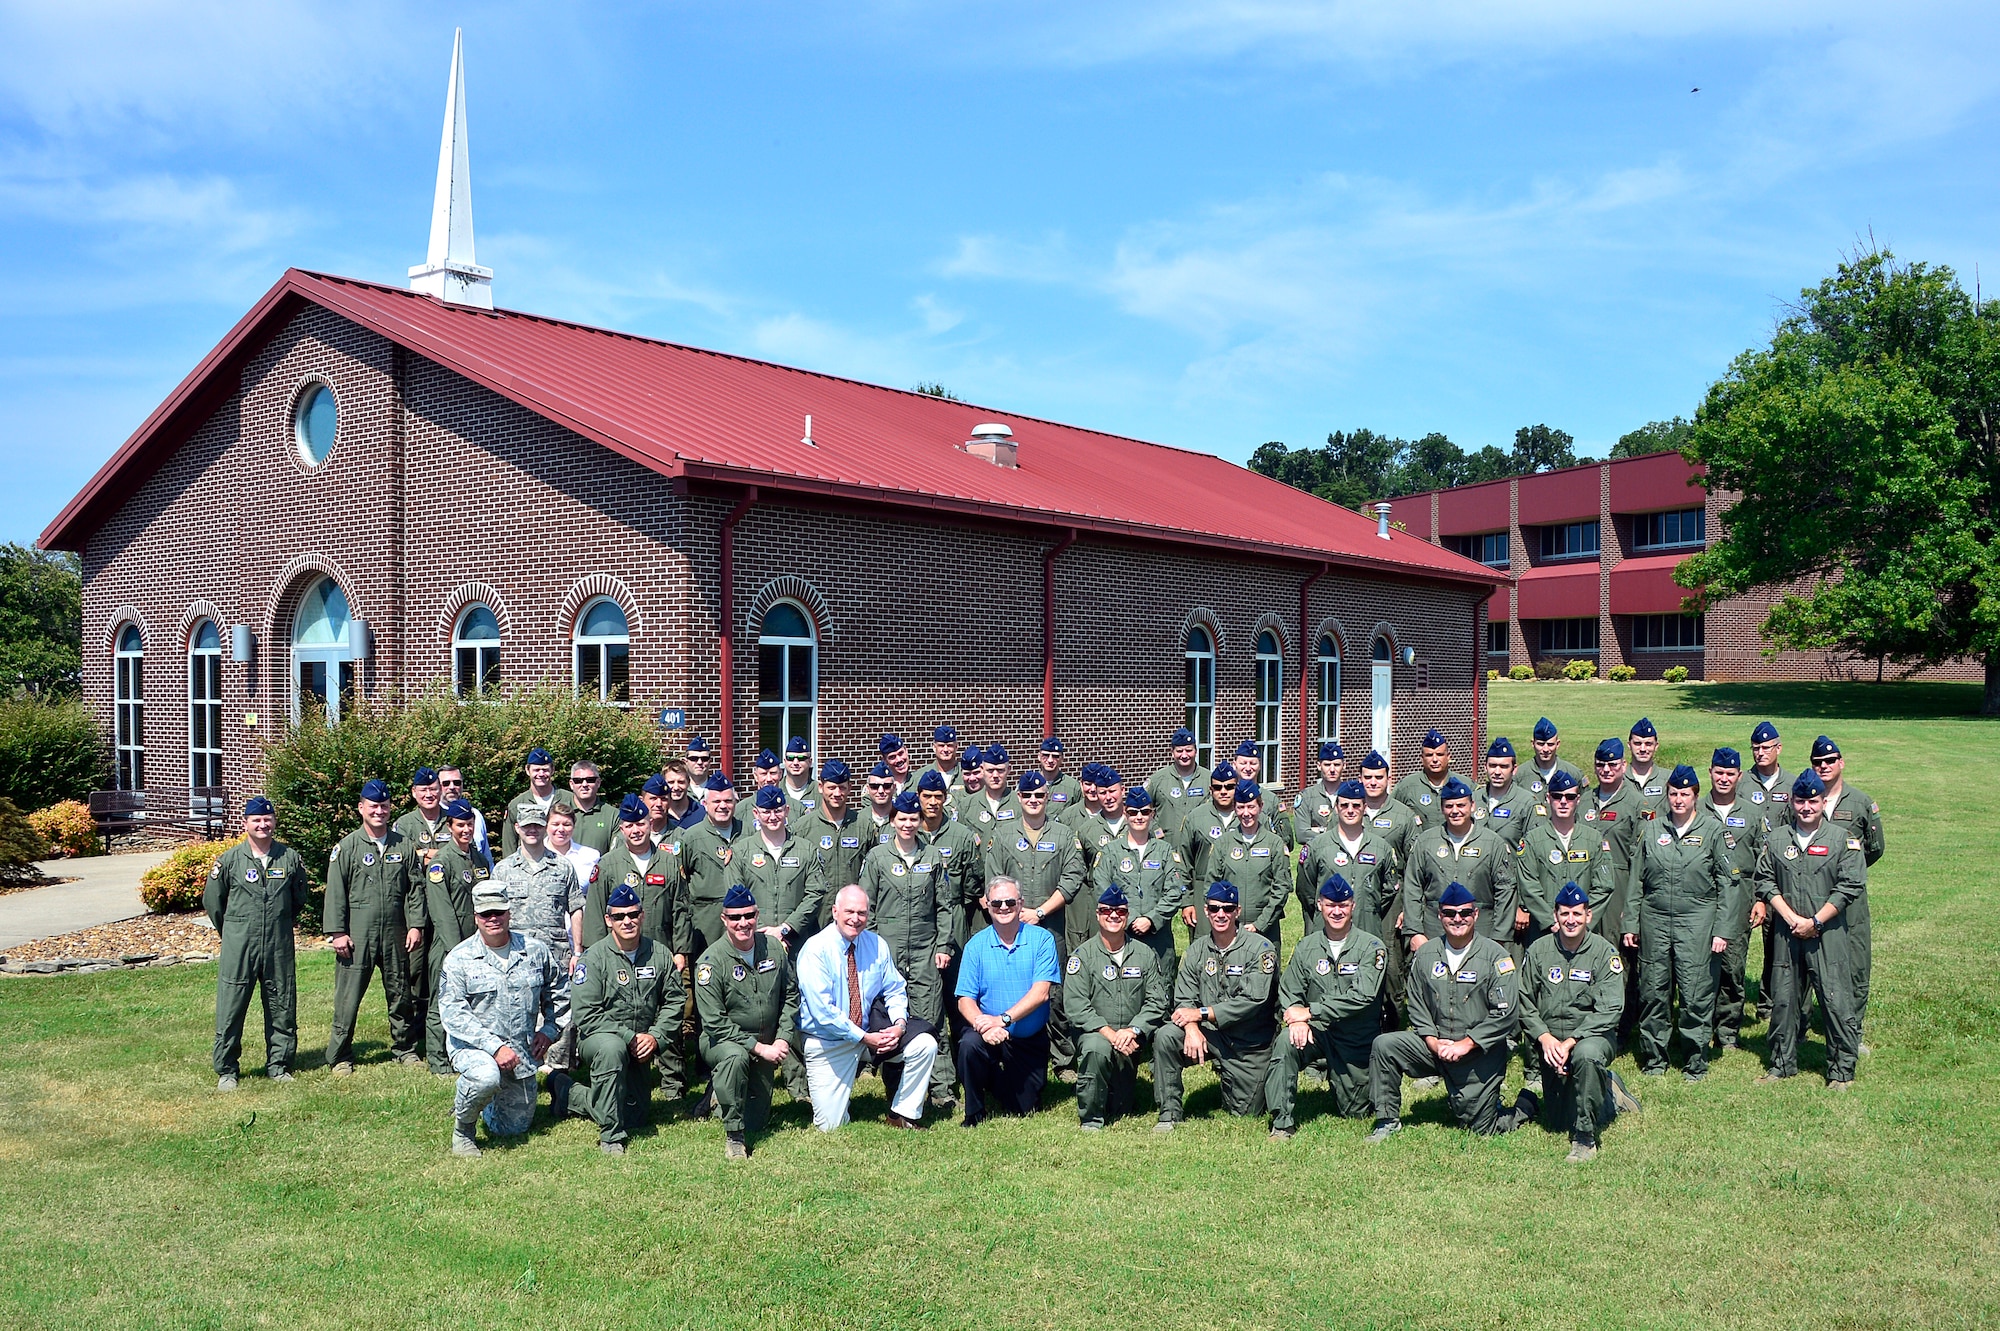 MCGHEE TYSON AIR NATIONAL GUARD BASE, Tenn. - About 60 Air National Guard and Air Force Reserve Command officers and safety experts meet at the I.G. Brown Training and Education Center's campus here August 4, 2015, during the four-day Air Reserve Component Chief of Safety Course. (U.S. Air National Guard photo by Master Sgt. Mike R. Smith/Released)